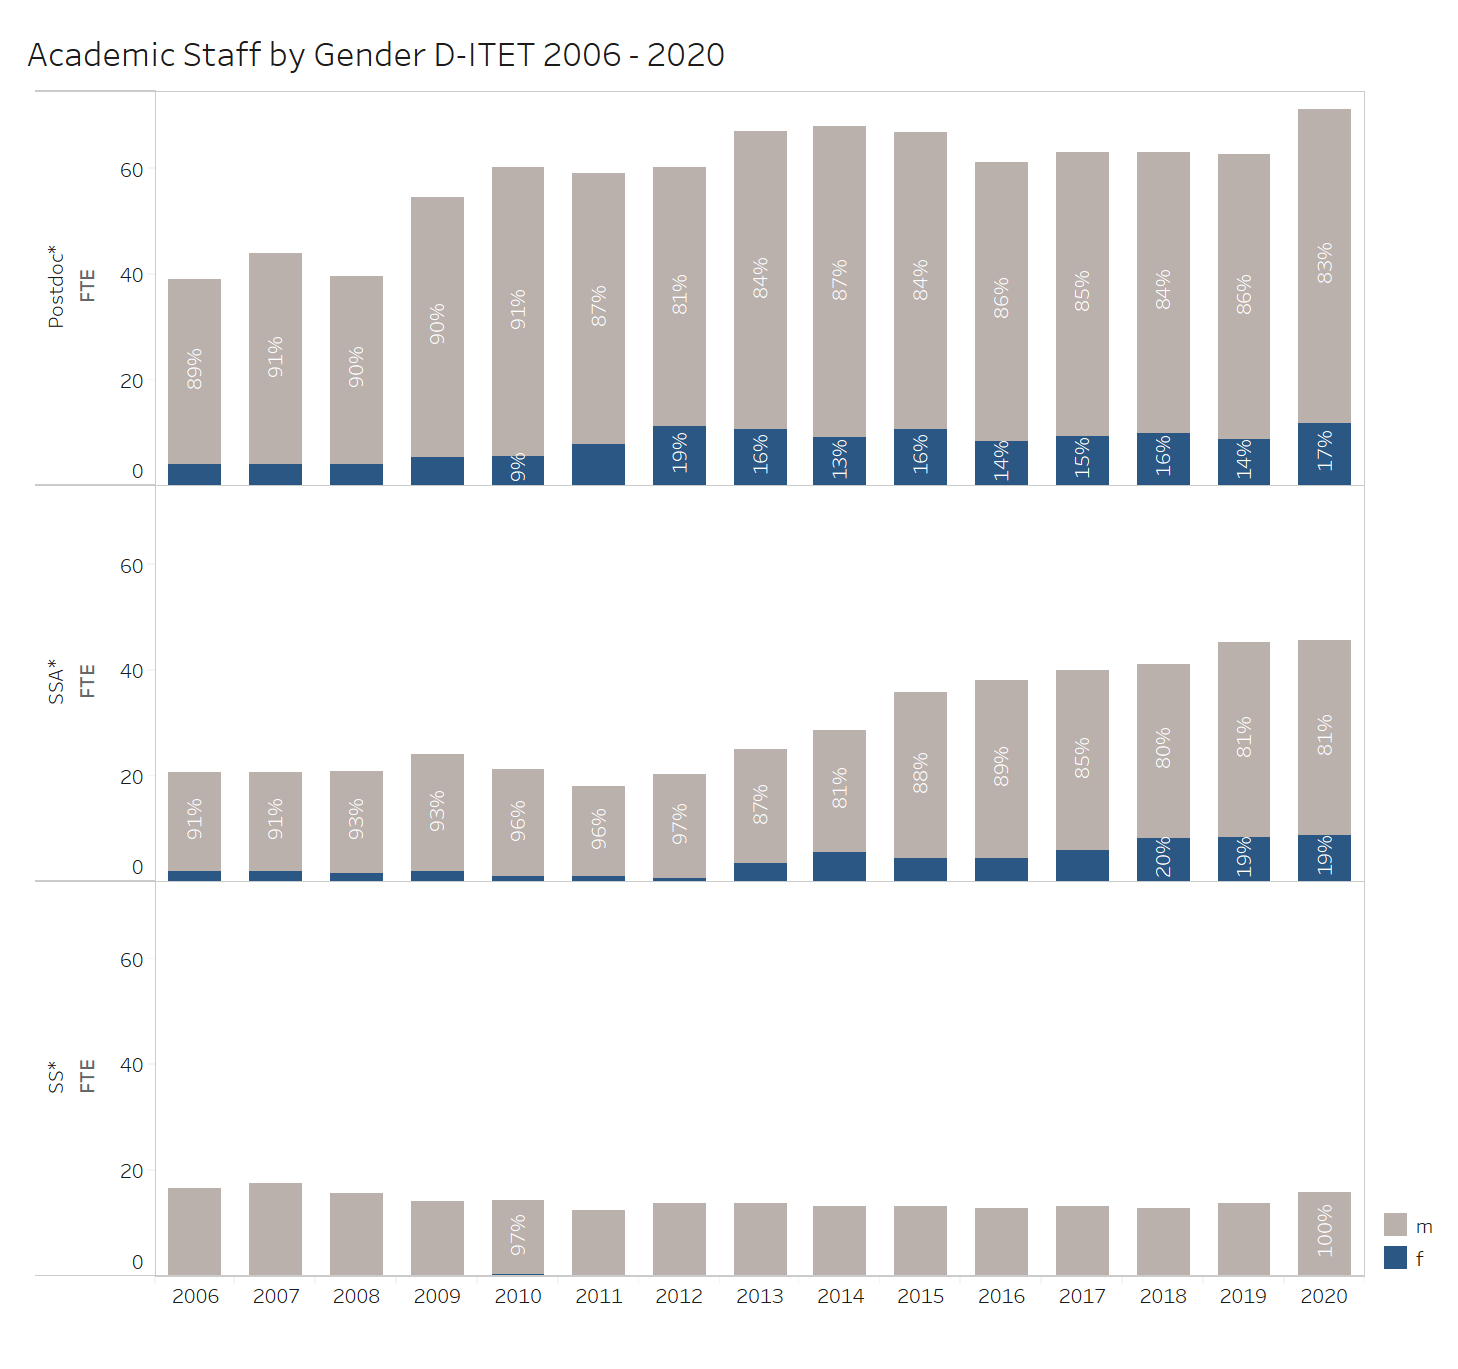 Academic Staff by Gender D-ITET 2006 - 2020